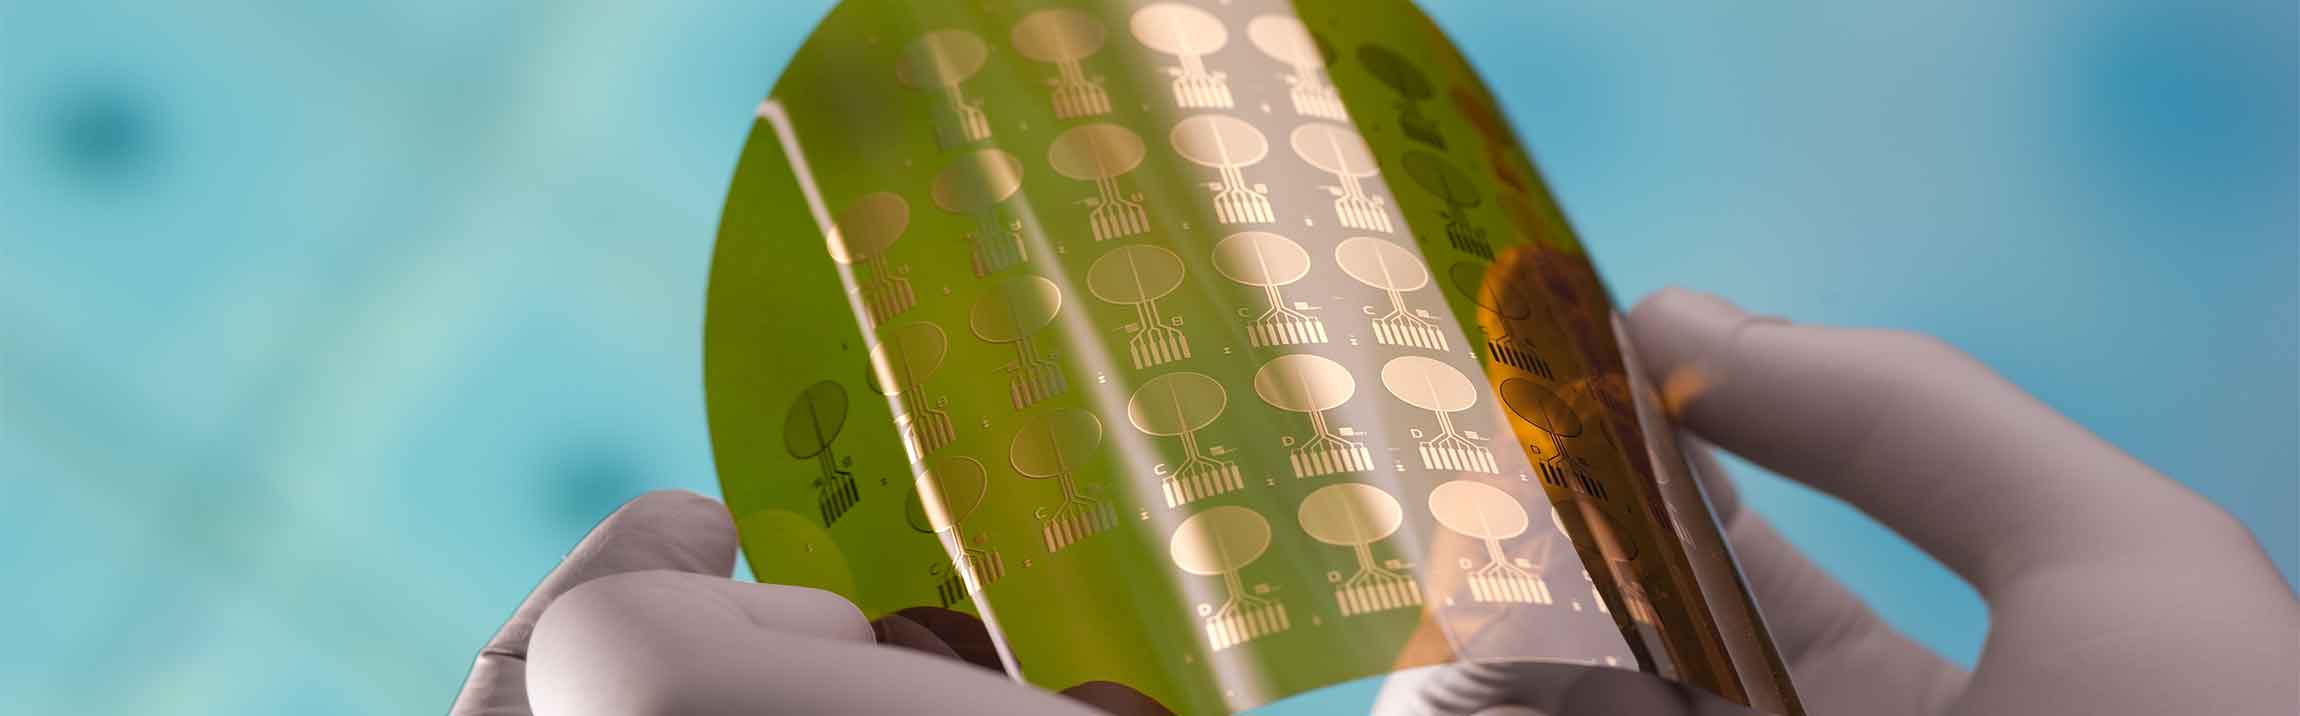 Electrochemical sensors on foil substrate